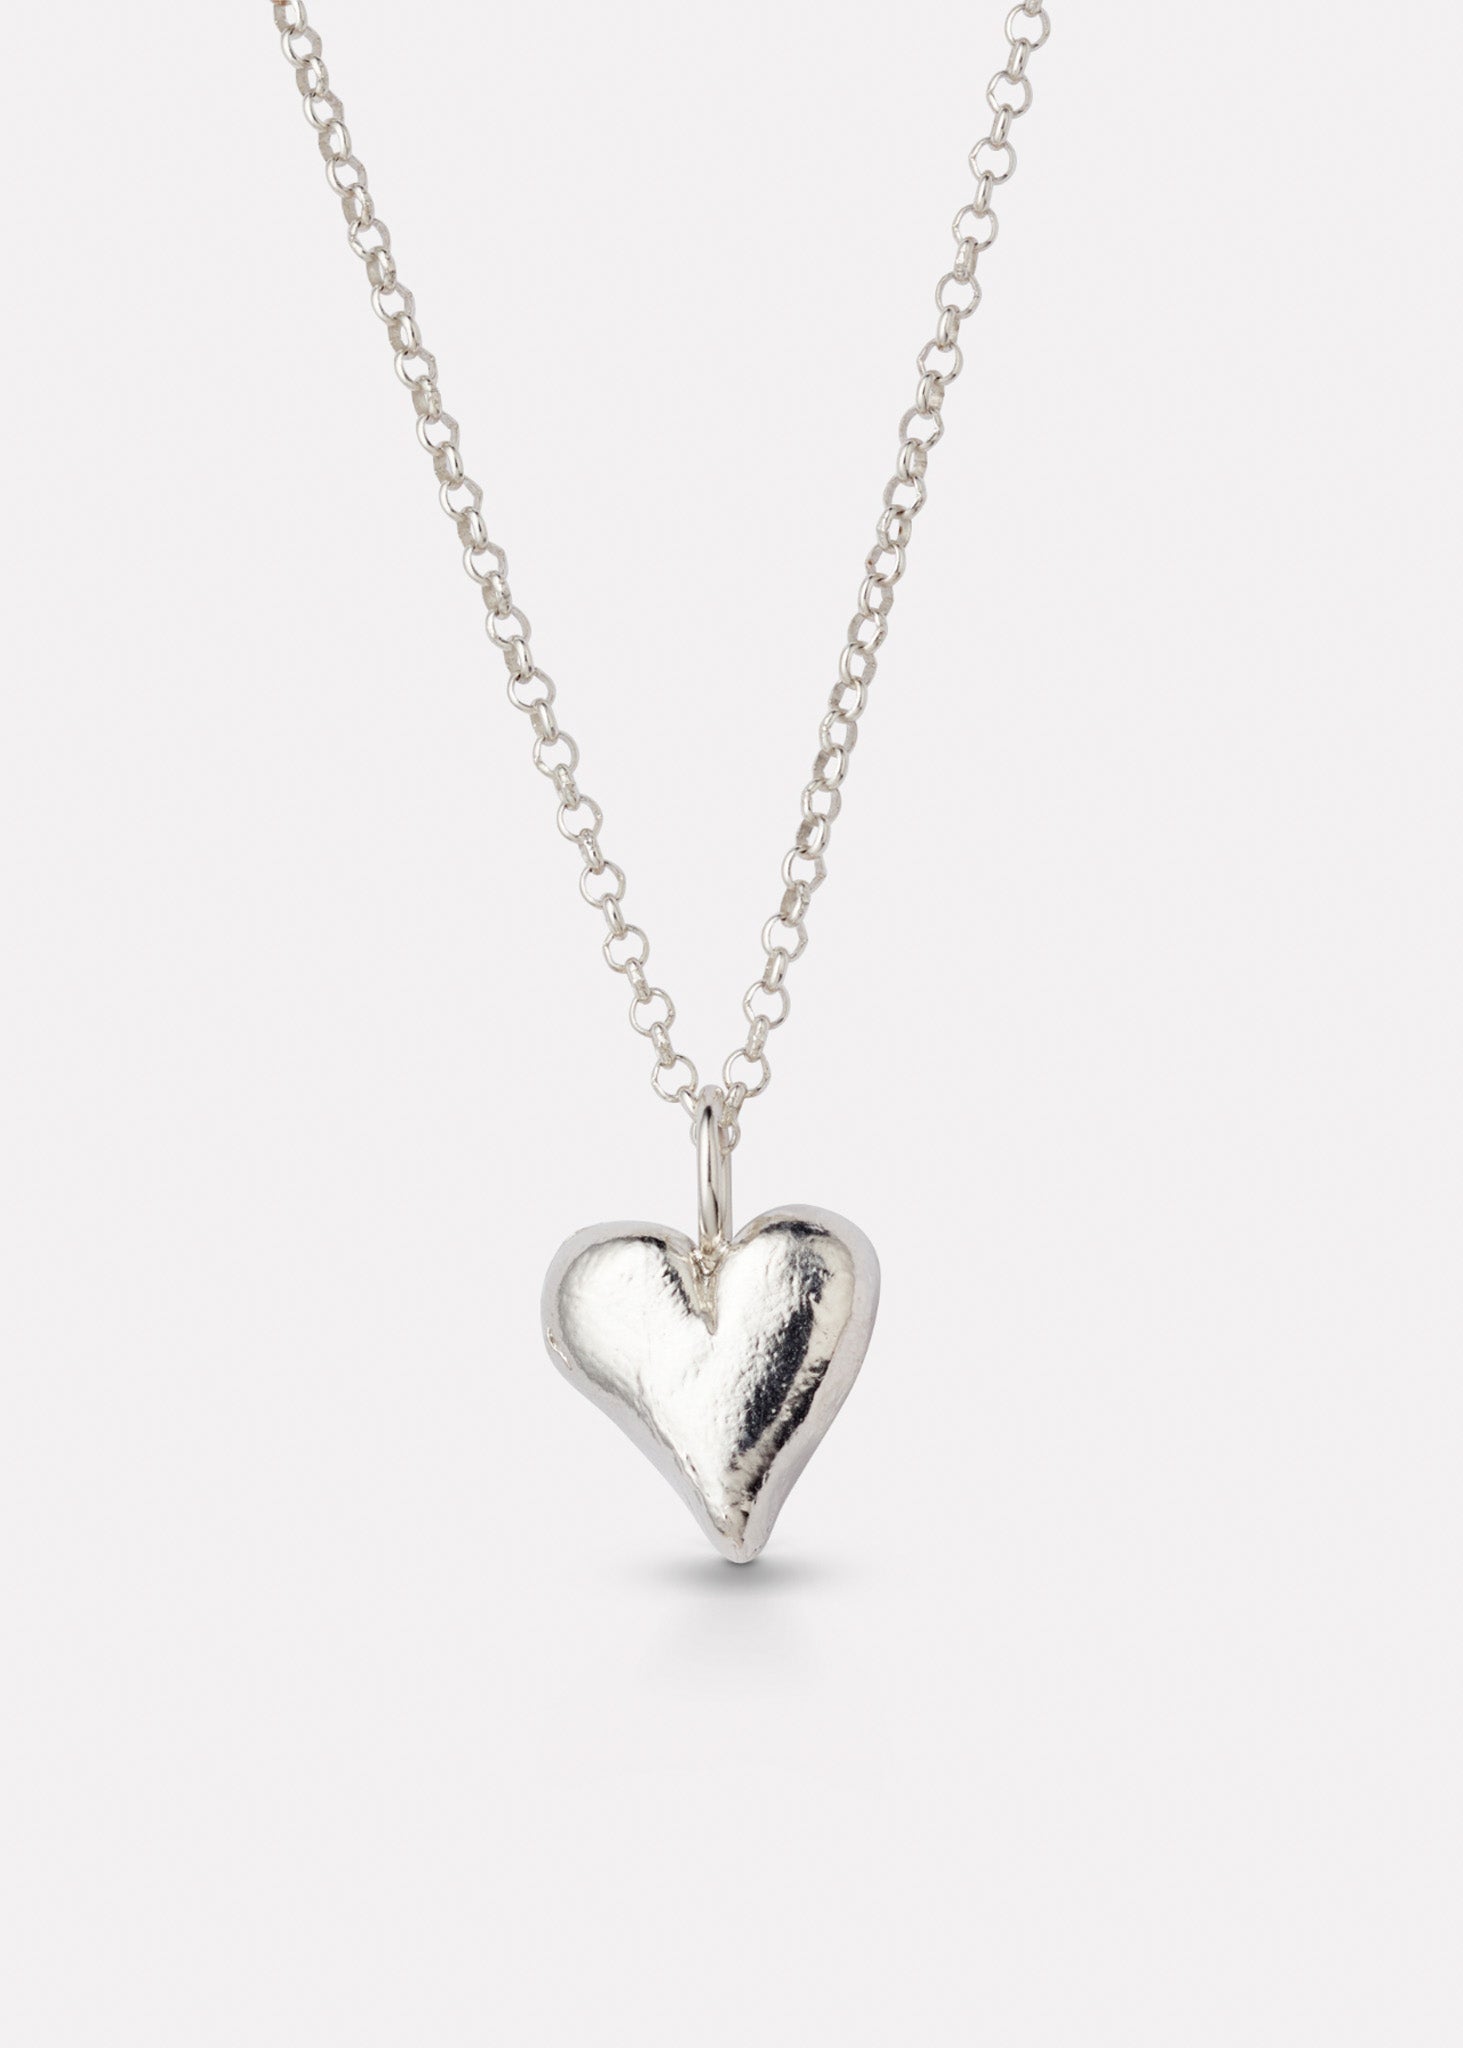 Mia heart pendant in silver with chain, large